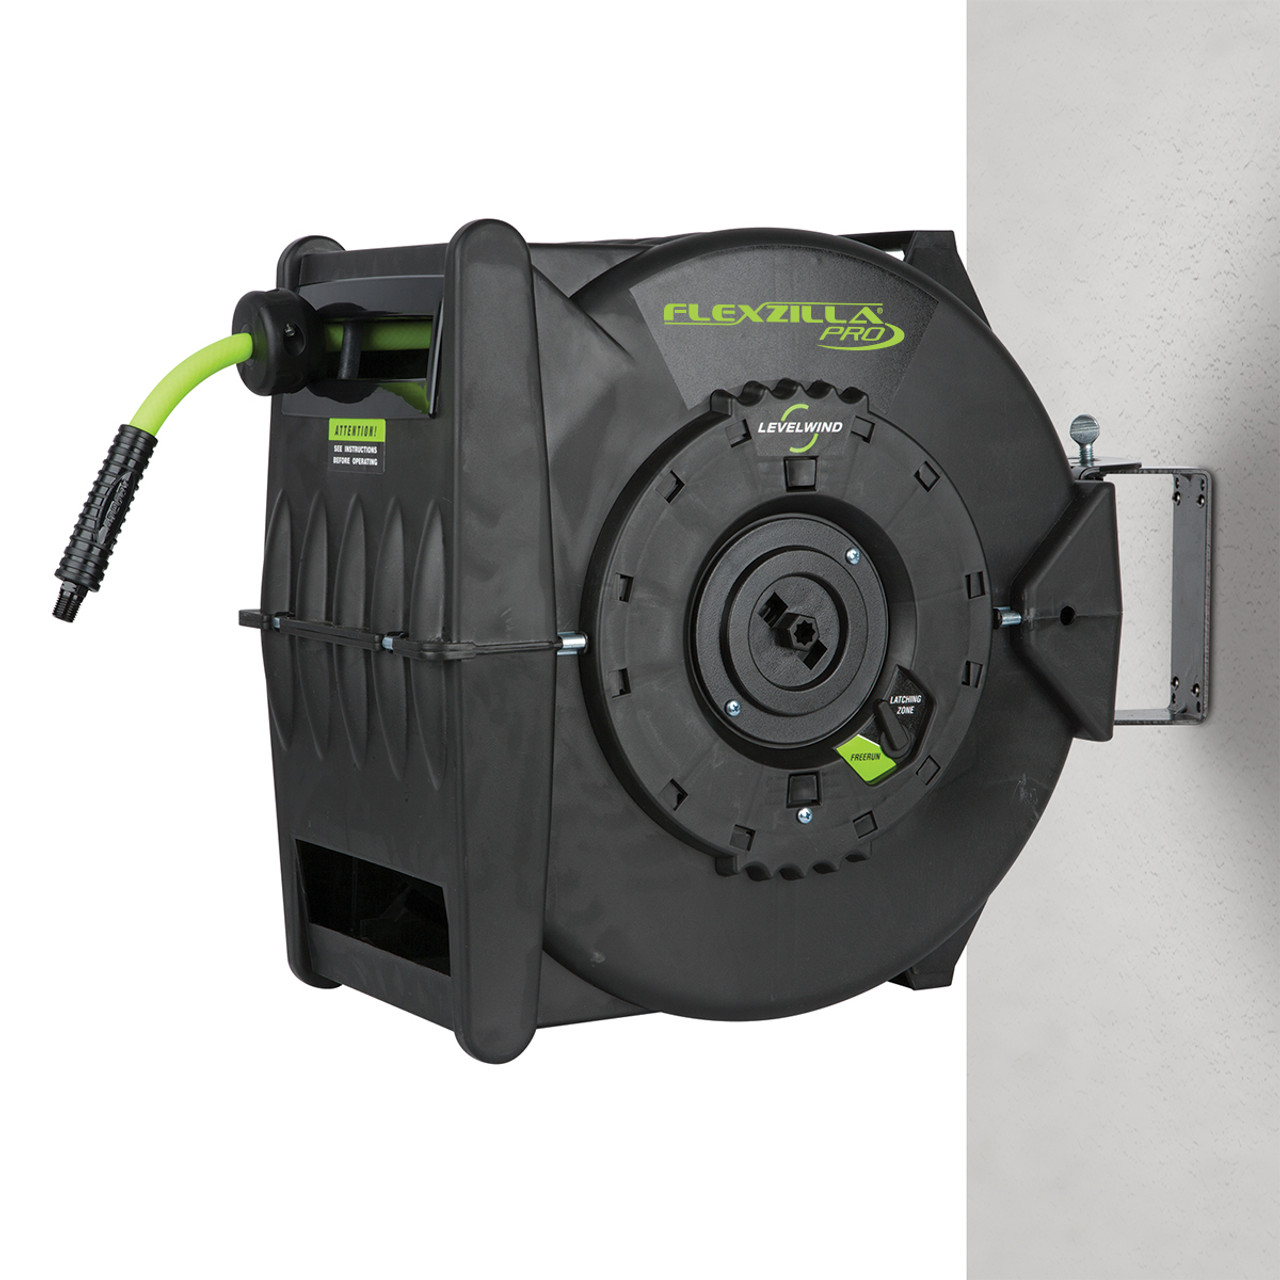 Air Hose Reel - Pro X Extreme - Retractable